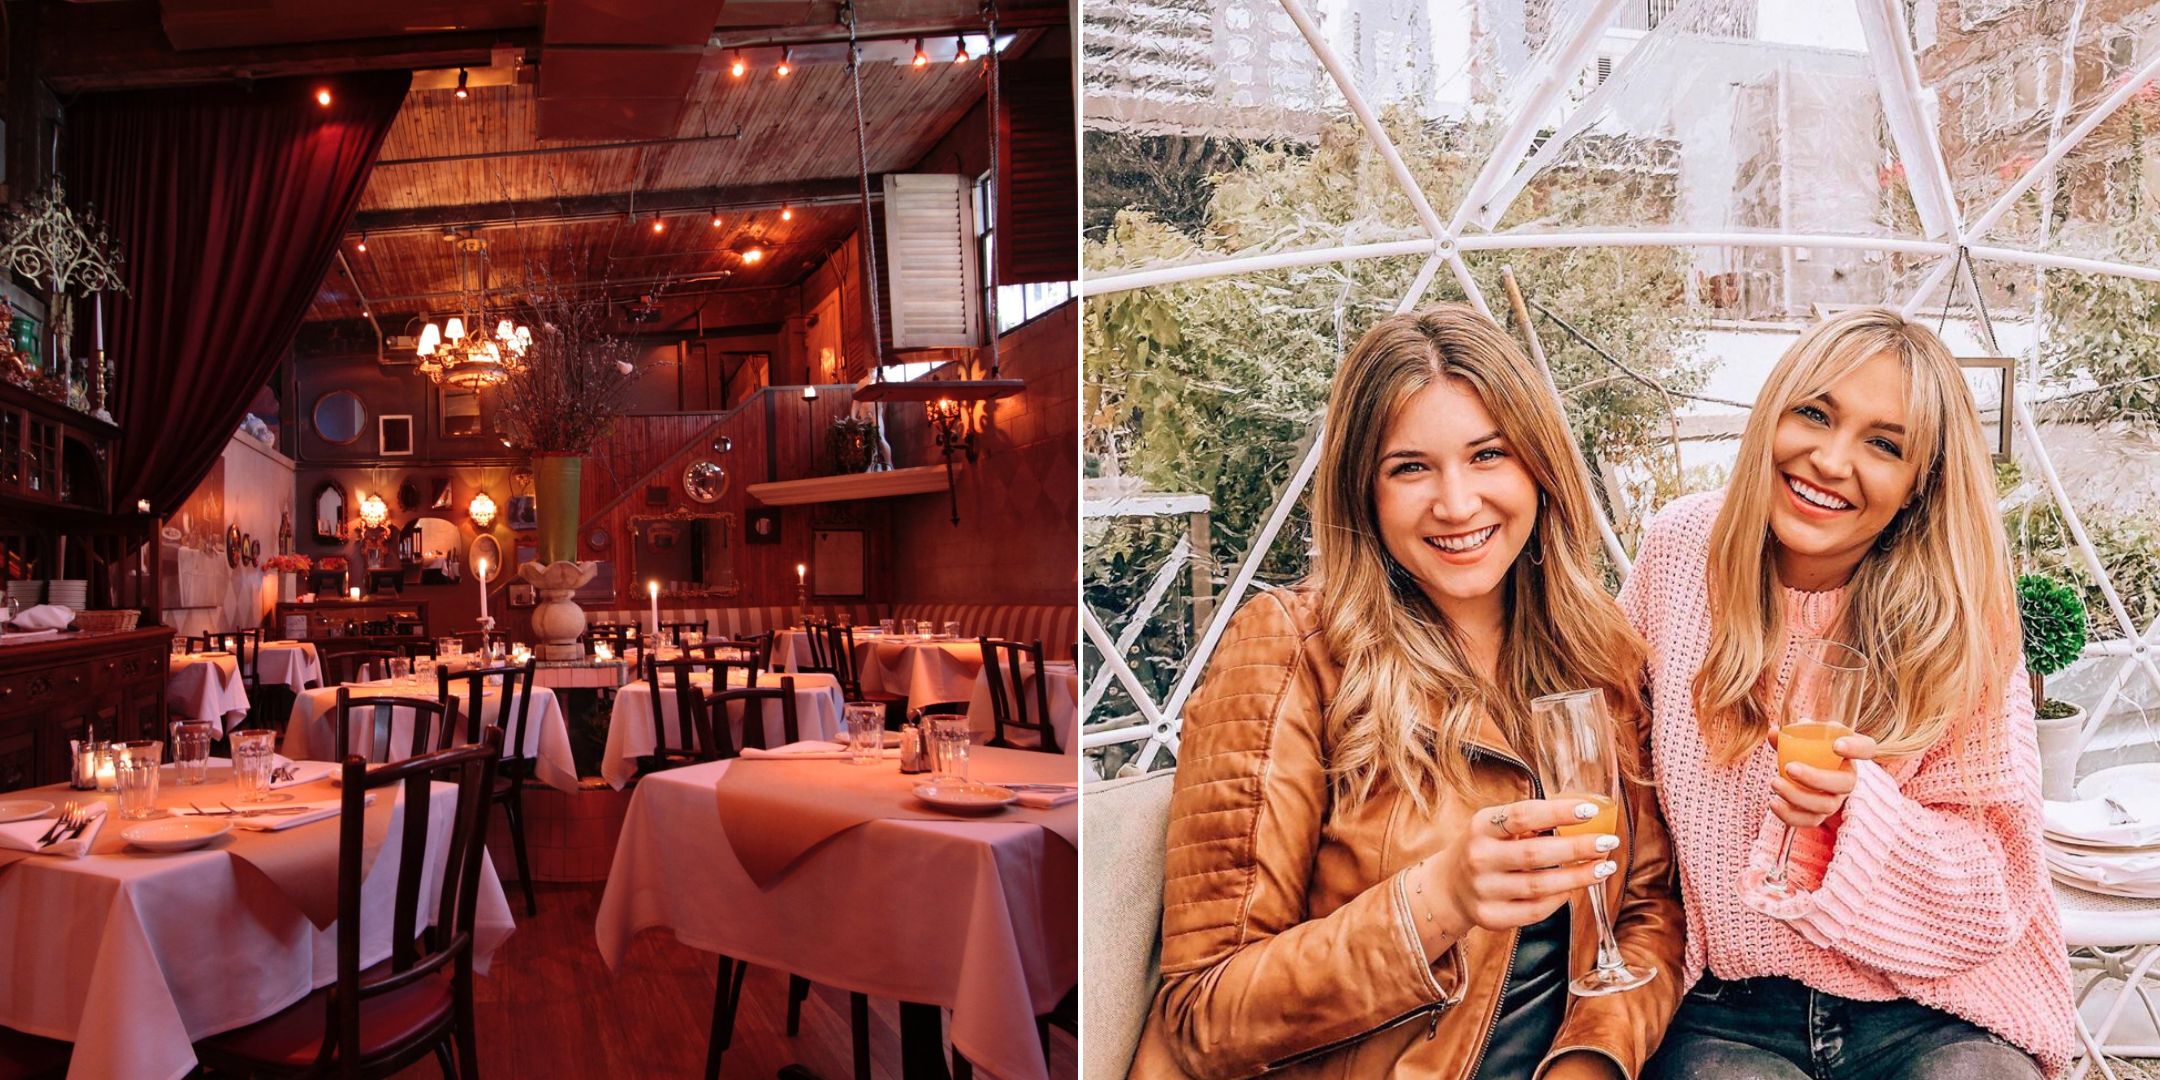 two photos featuring people smiling at a restaurant and the inside of a cozy restaurant